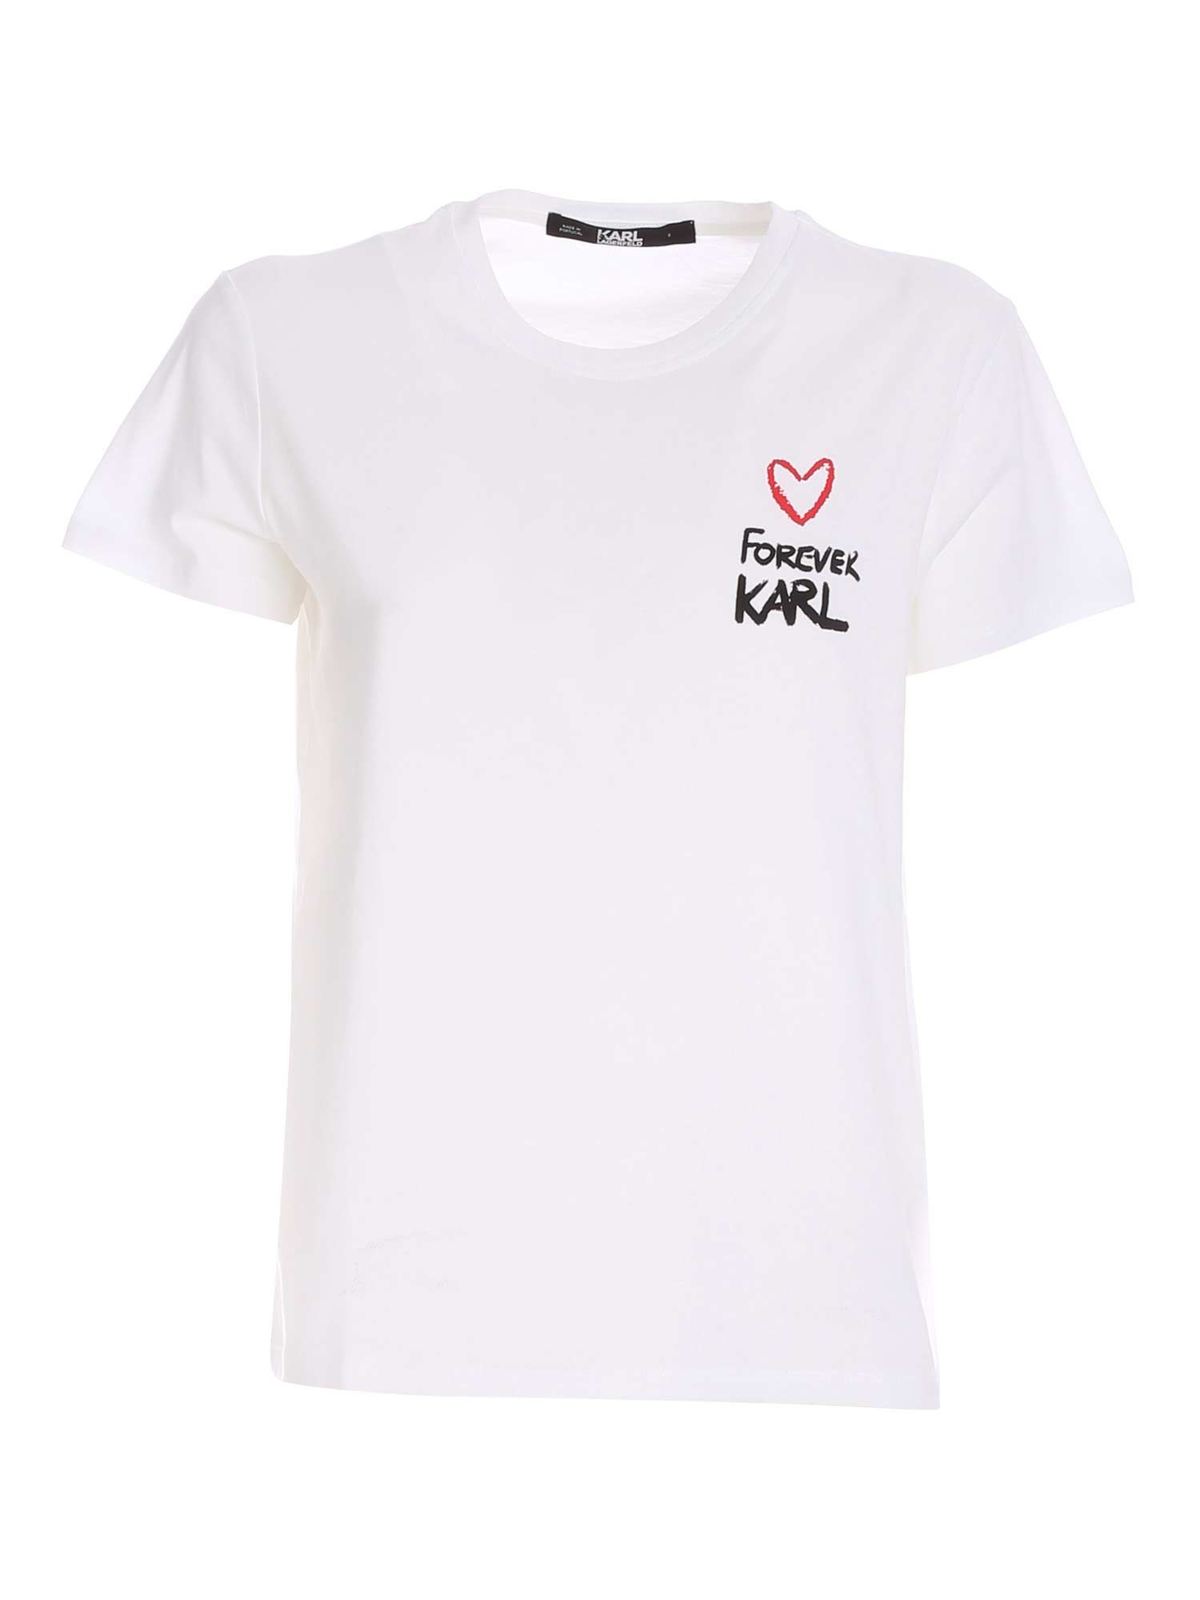 Karl Lagerfeld Contrasting Print T-shirt In White